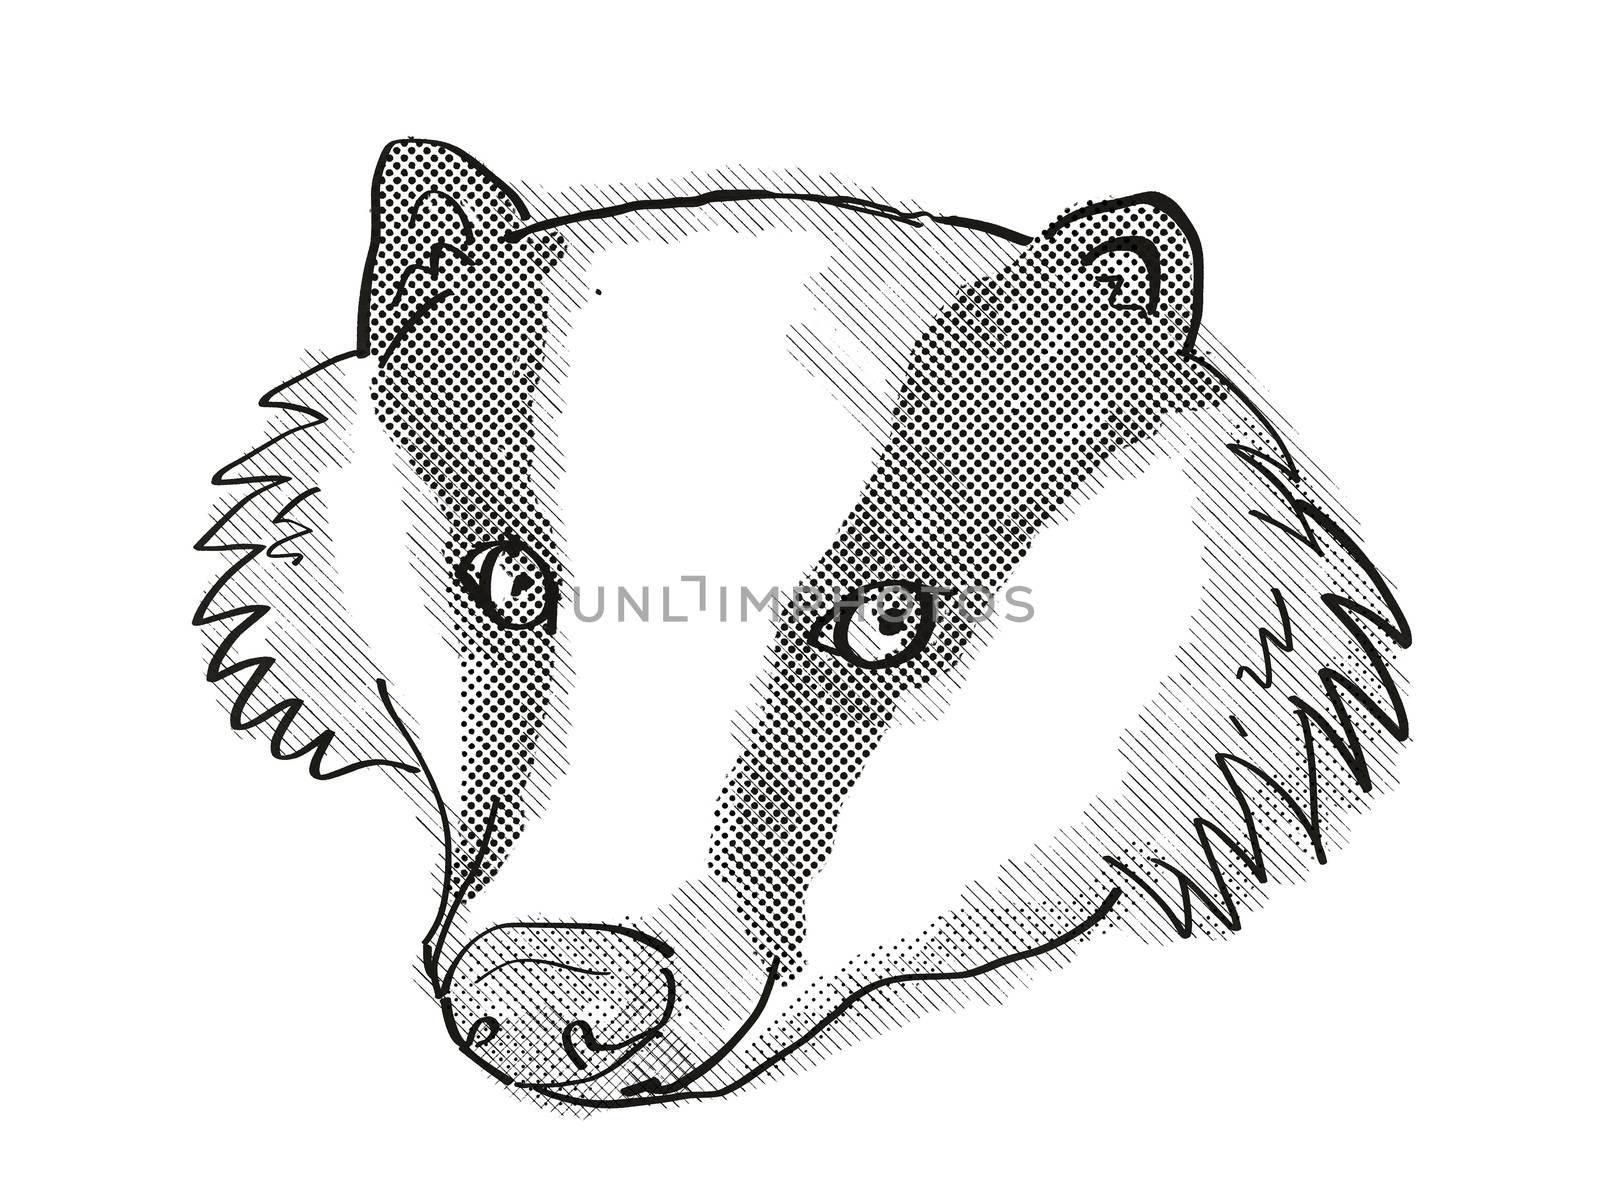 Retro cartoon style drawing of head of a Eurasian Badger on isolated white background done in black and white.